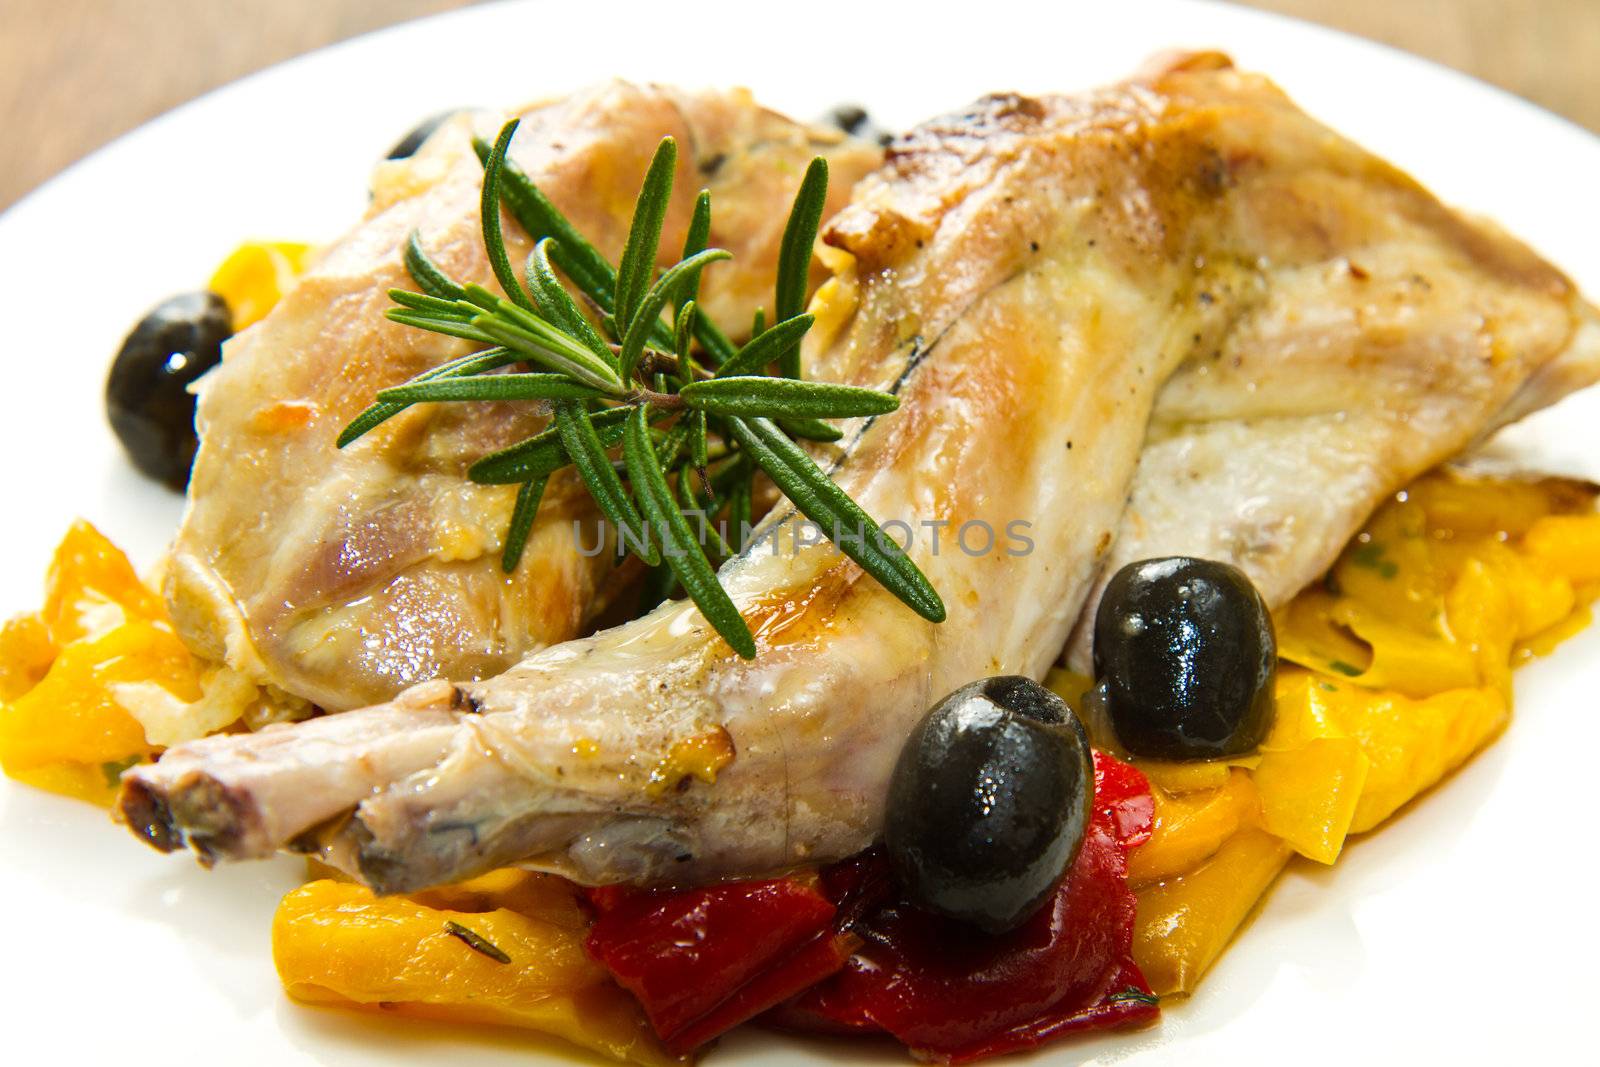 Baked rabbit with olives and pepper by lsantilli